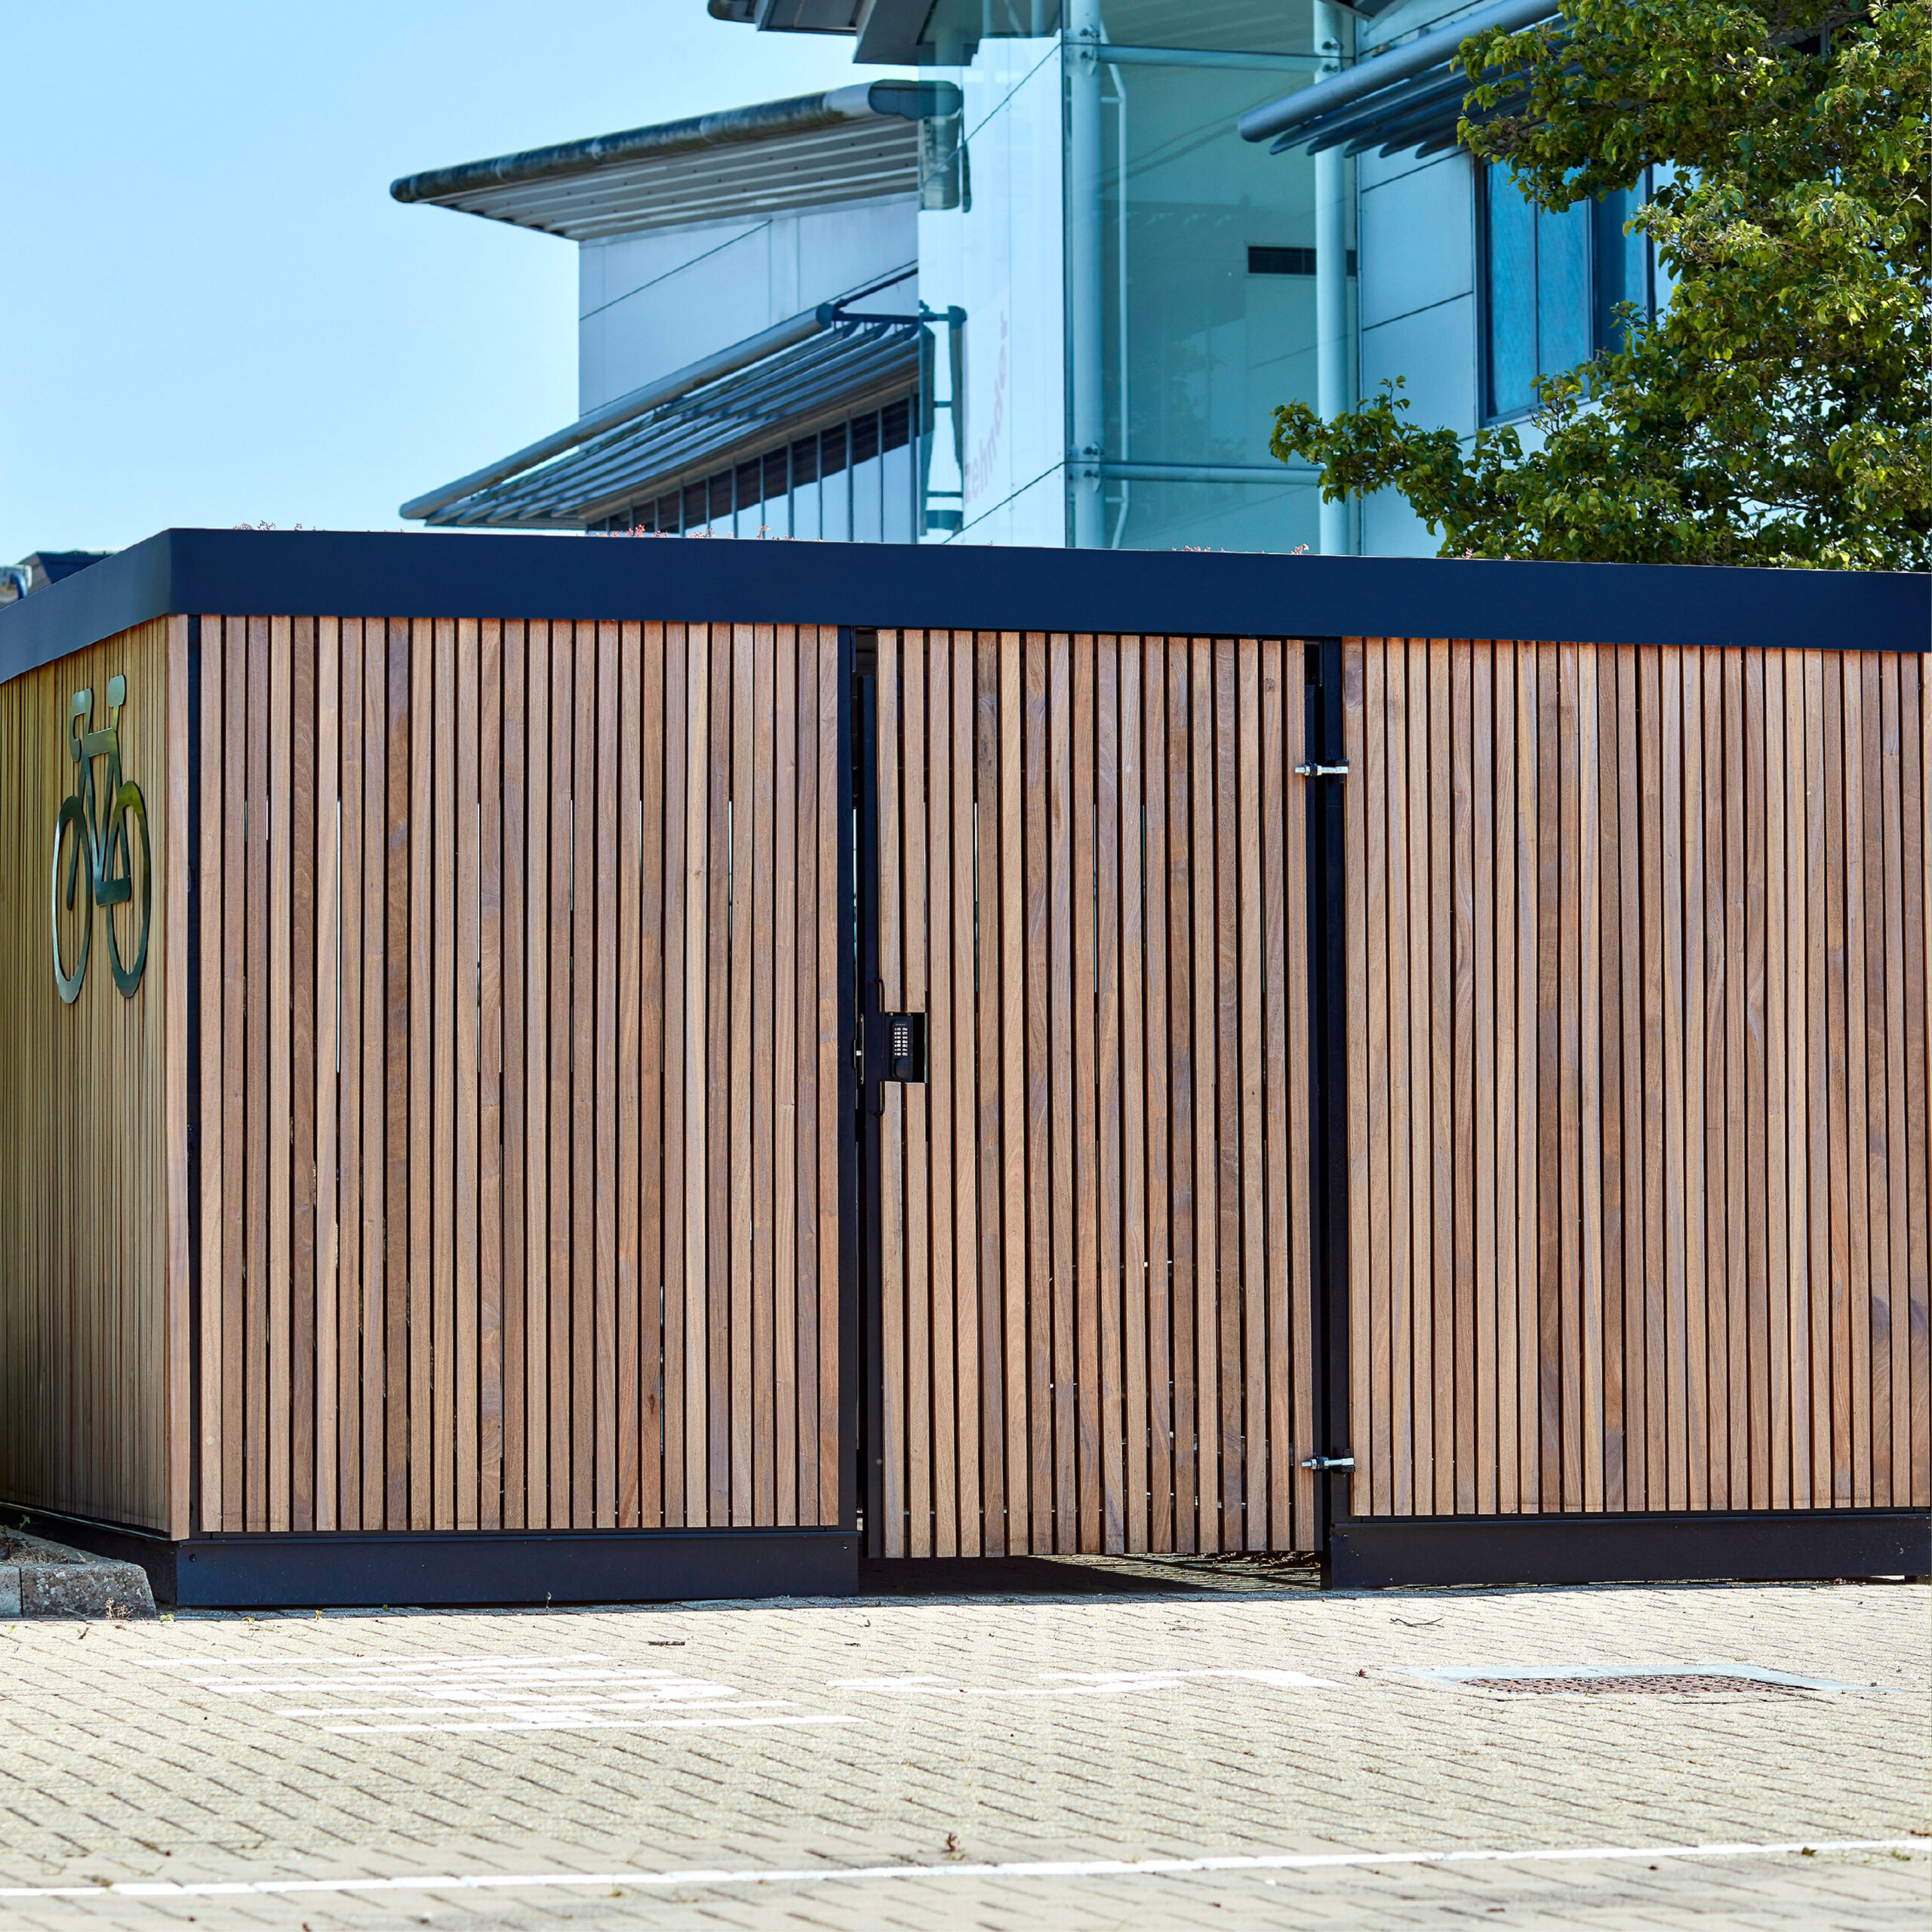 A modern wooden bike storage facility with vertical slats, featuring a black bicycle symbol and double doors, located next to an urban building with a glass exterior.